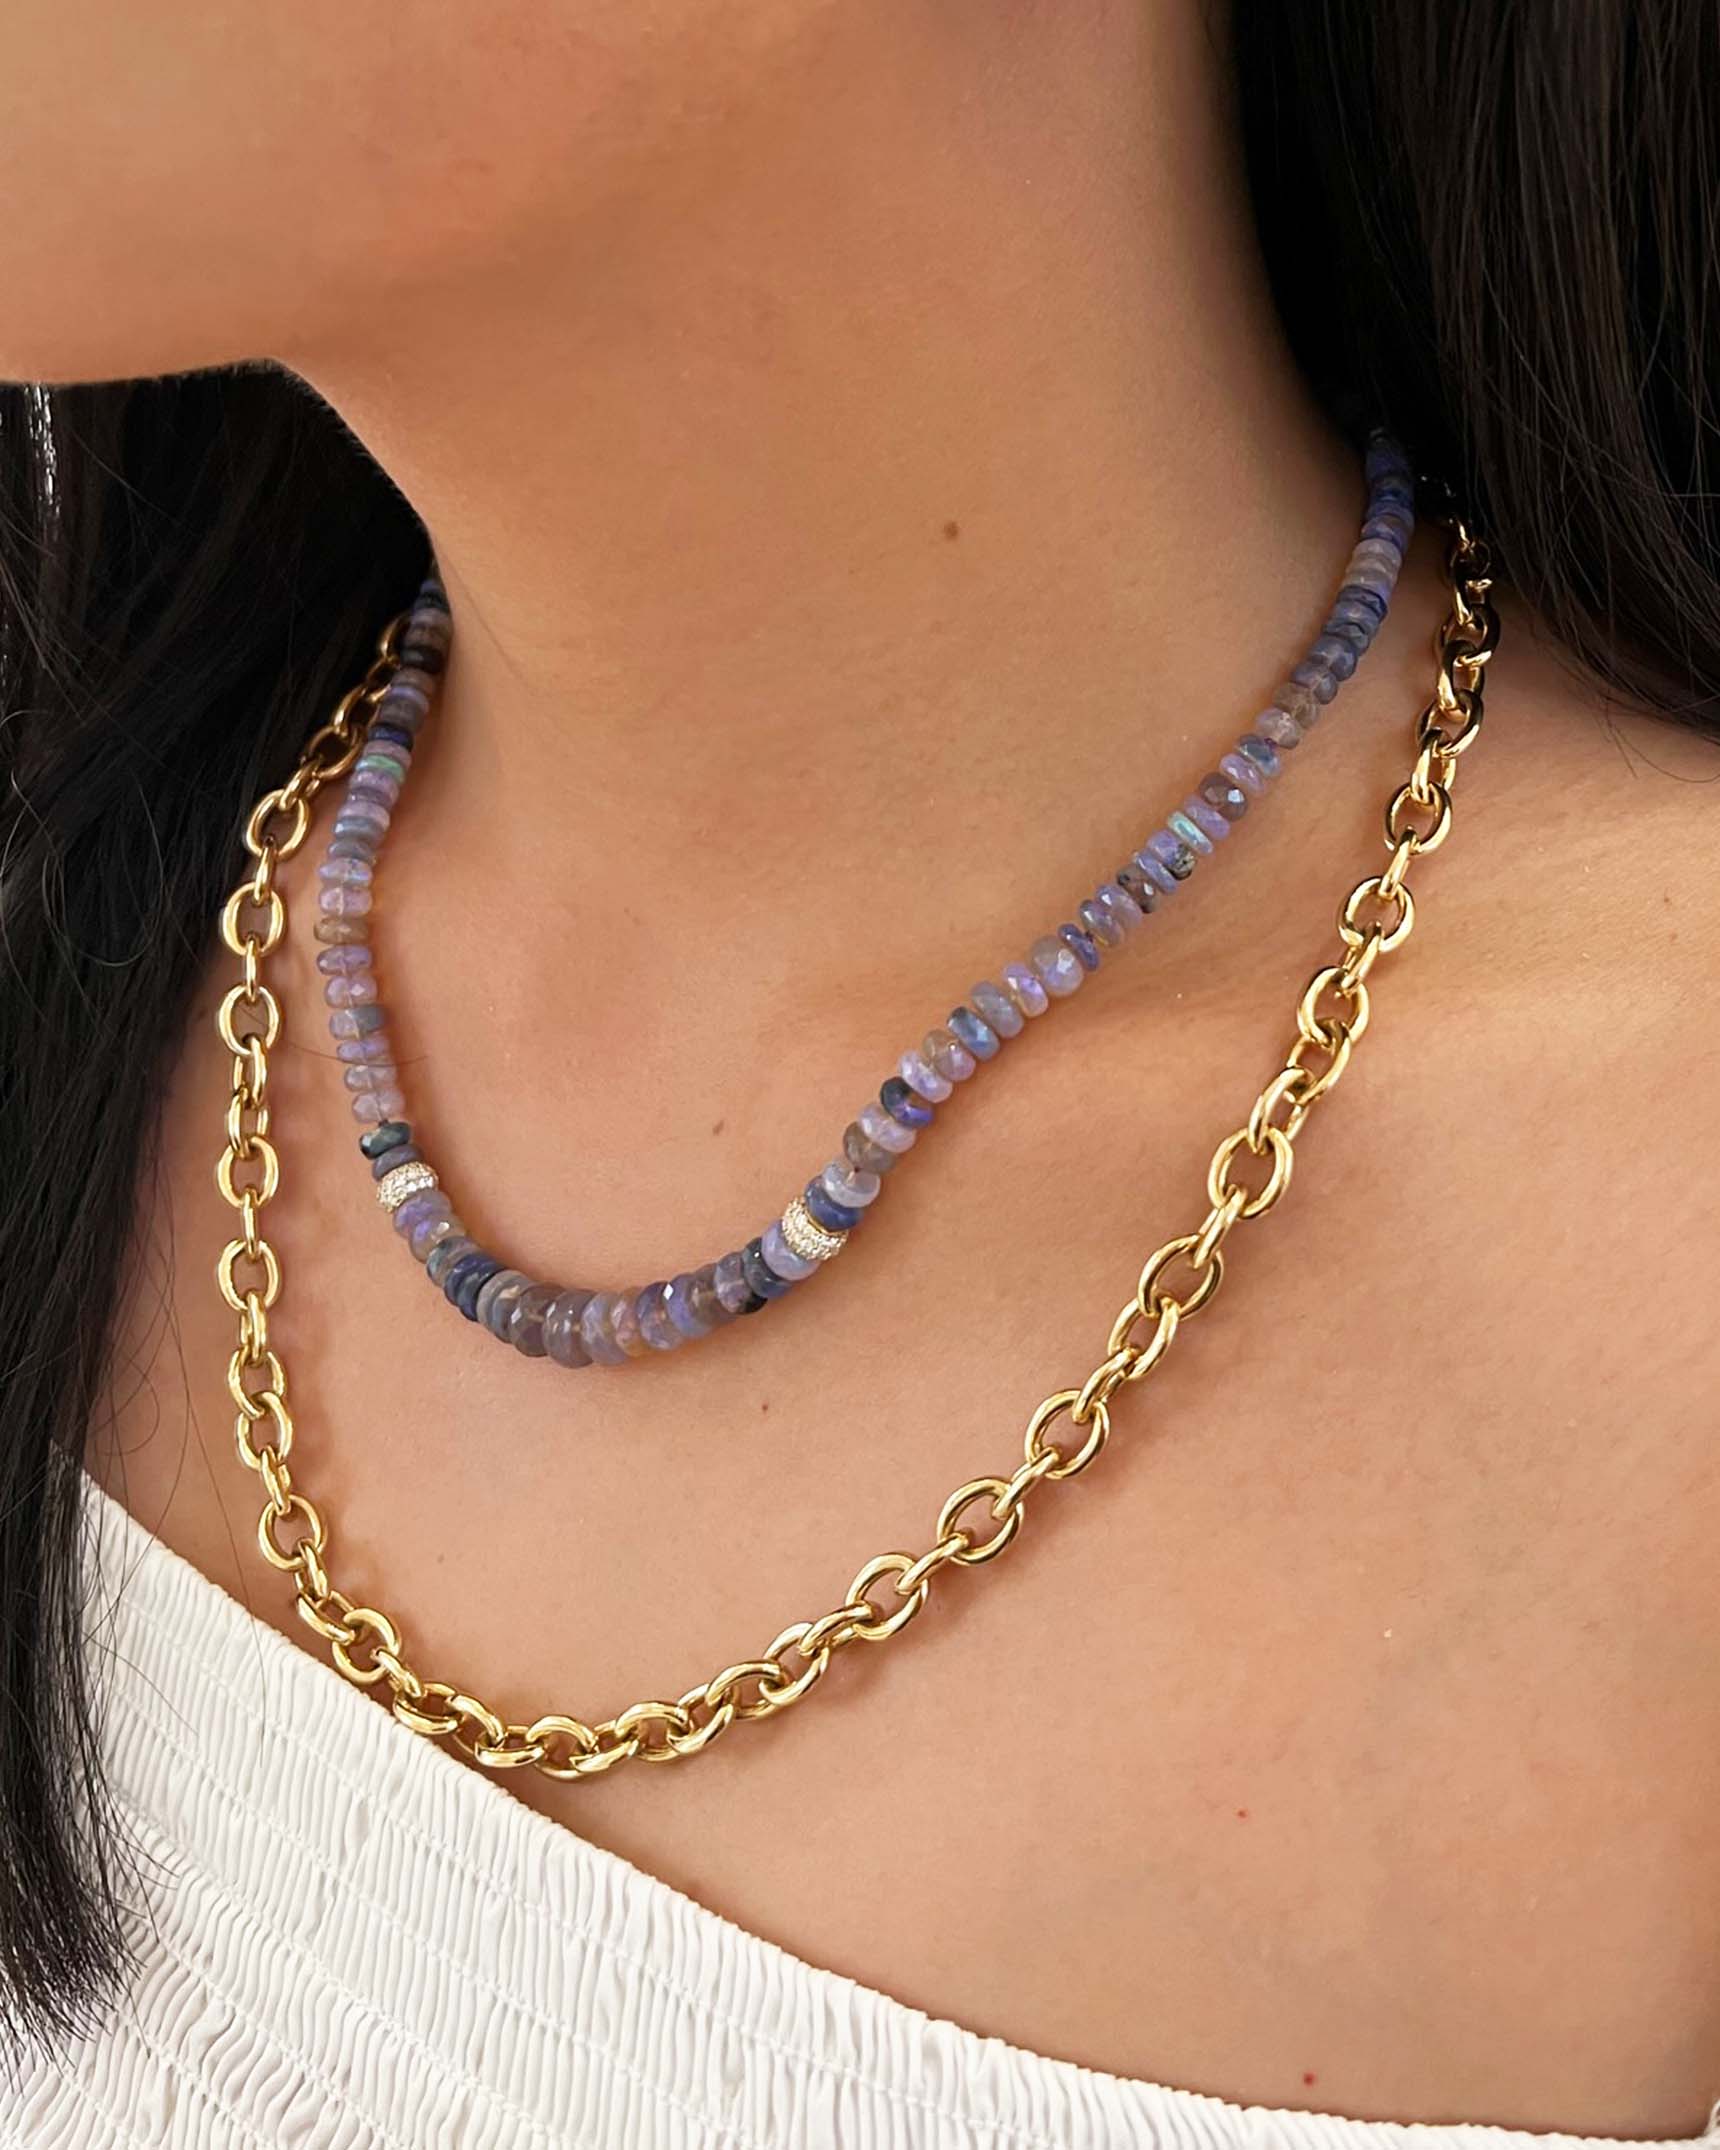 Yellow-Gold-Chain-Necklace-and-Black-Opal-Bead-Necklace-CHG2400976-NCOTK02044